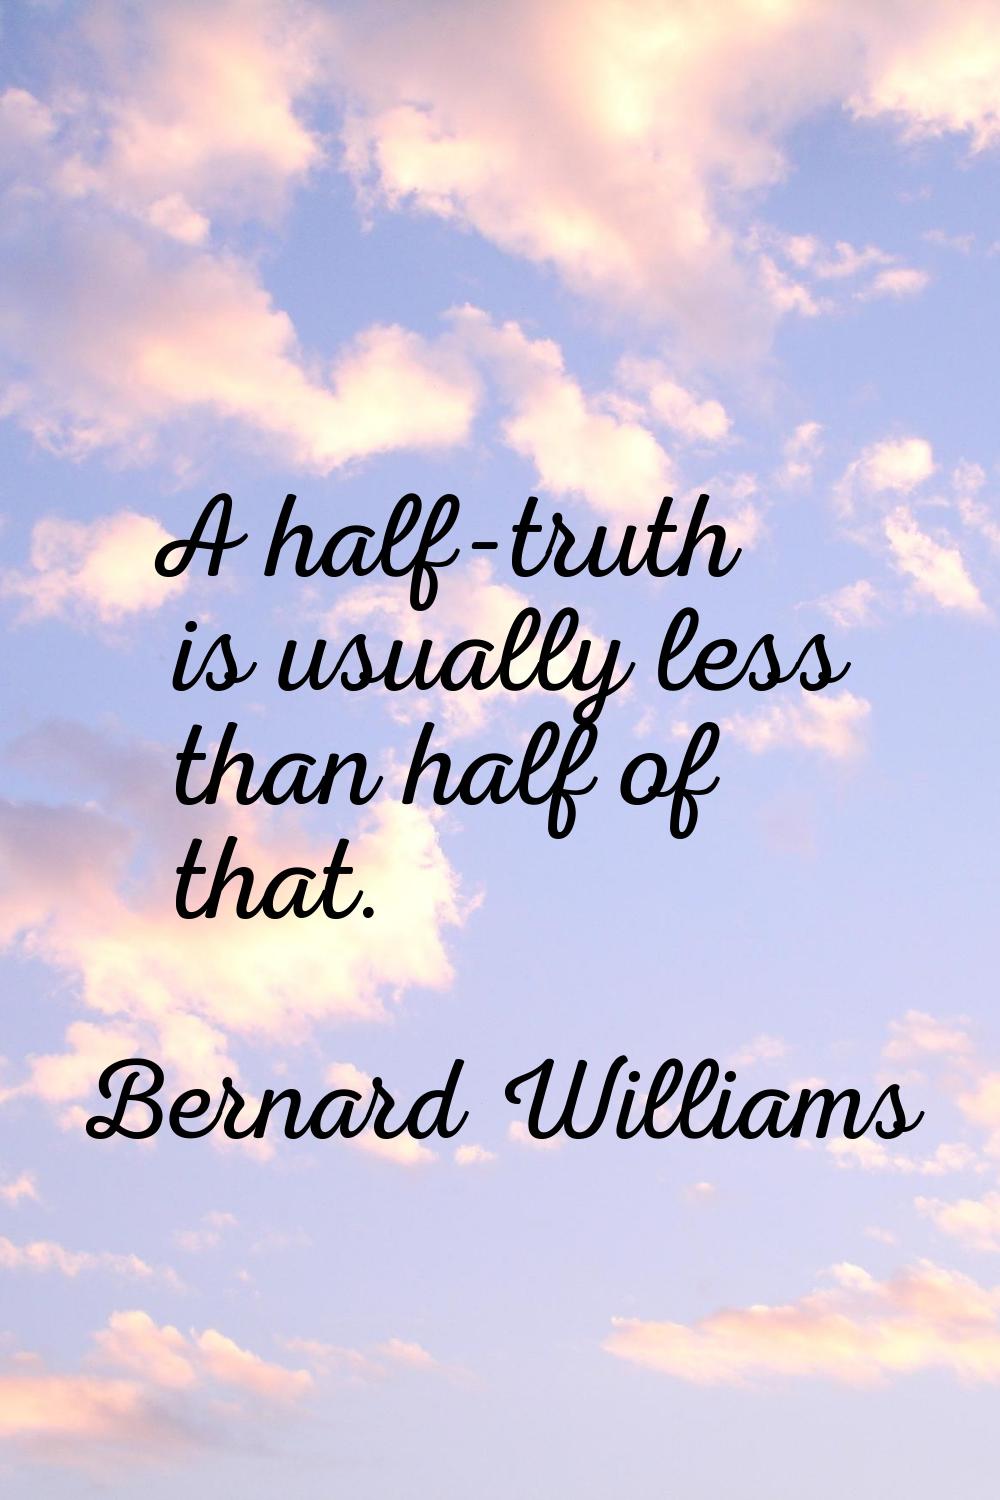 A half-truth is usually less than half of that.